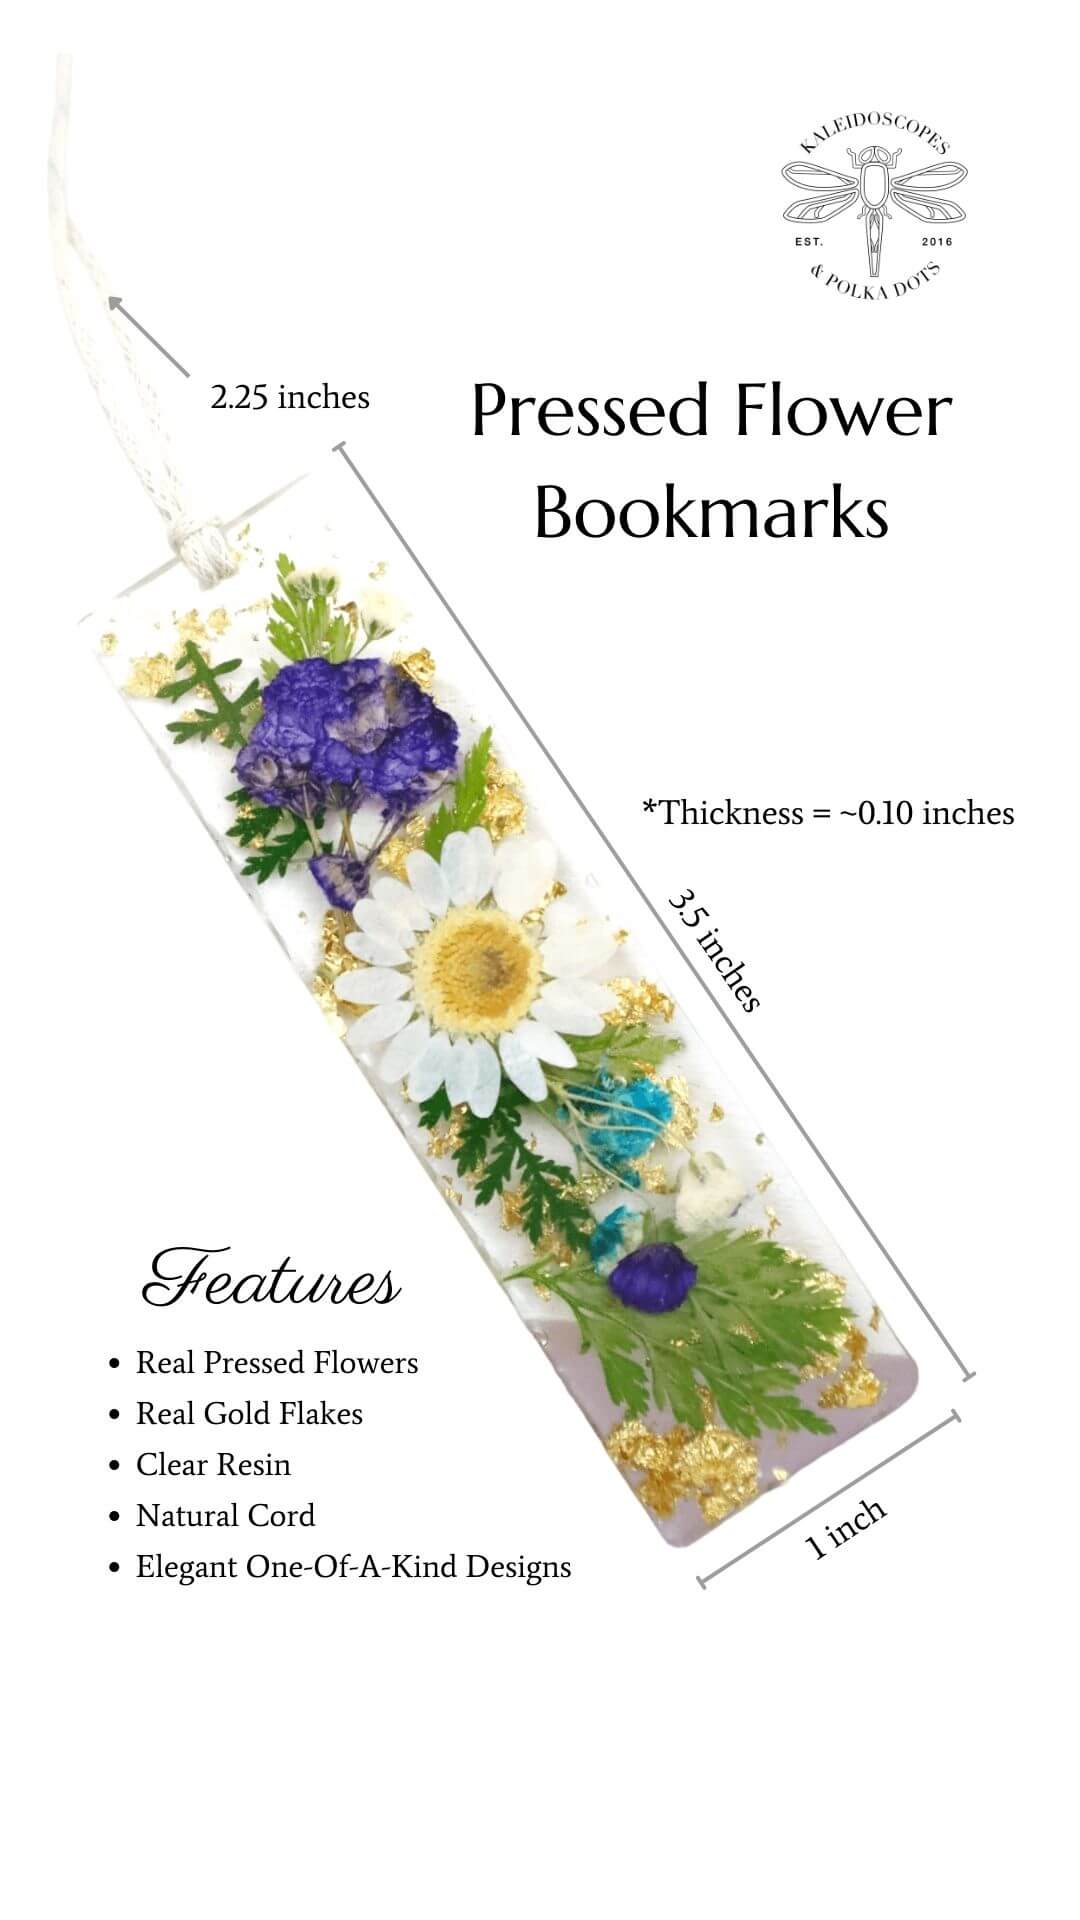 Pressed-Flower-Bookmarks---Elegant-Handmade-Bookmarks-Made-With-Real-Flowers---Kaleidoscopes-And-Polka-Dots